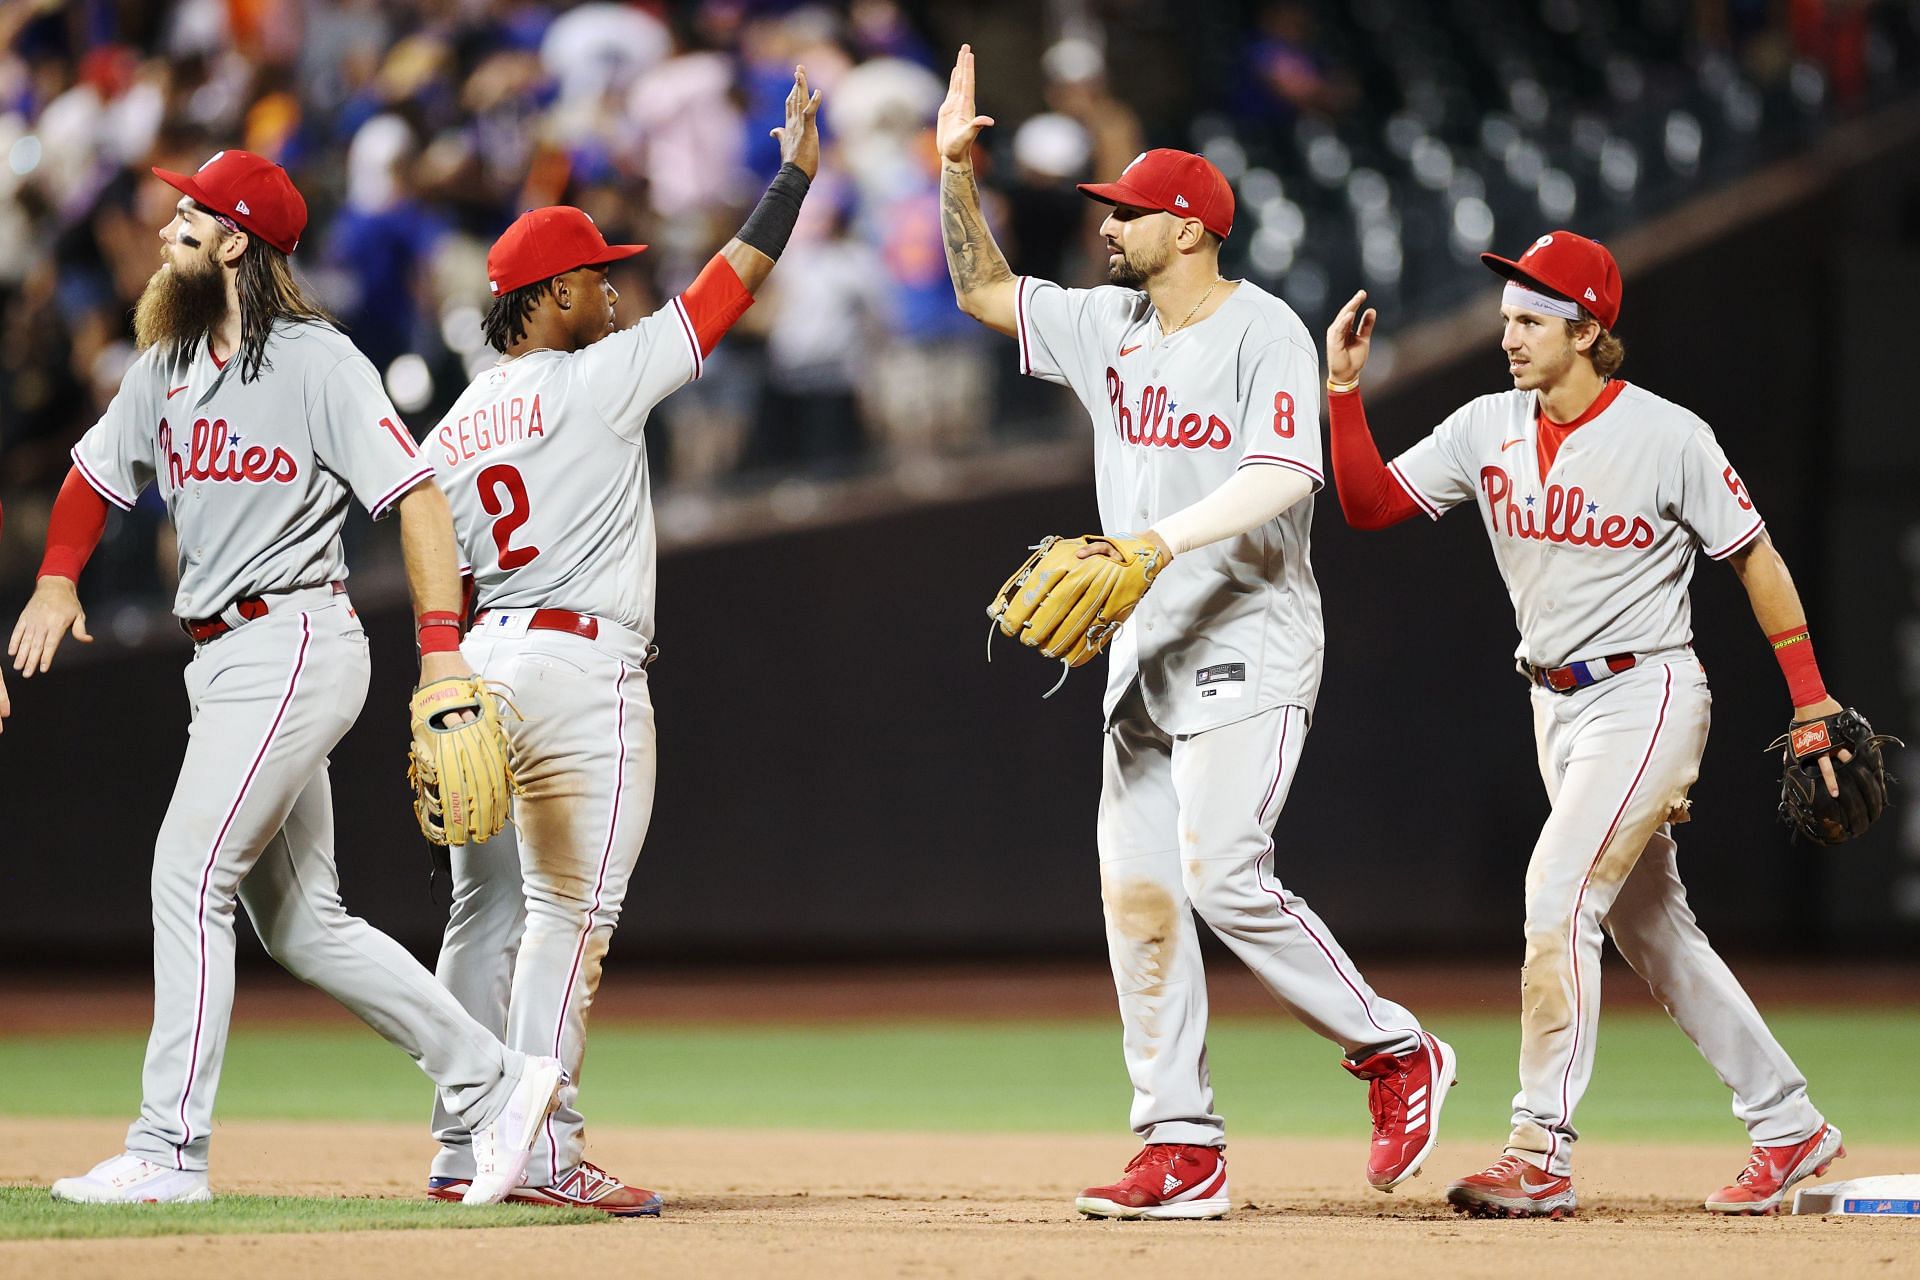 The Phillies celebrate a win over the New York Mets.